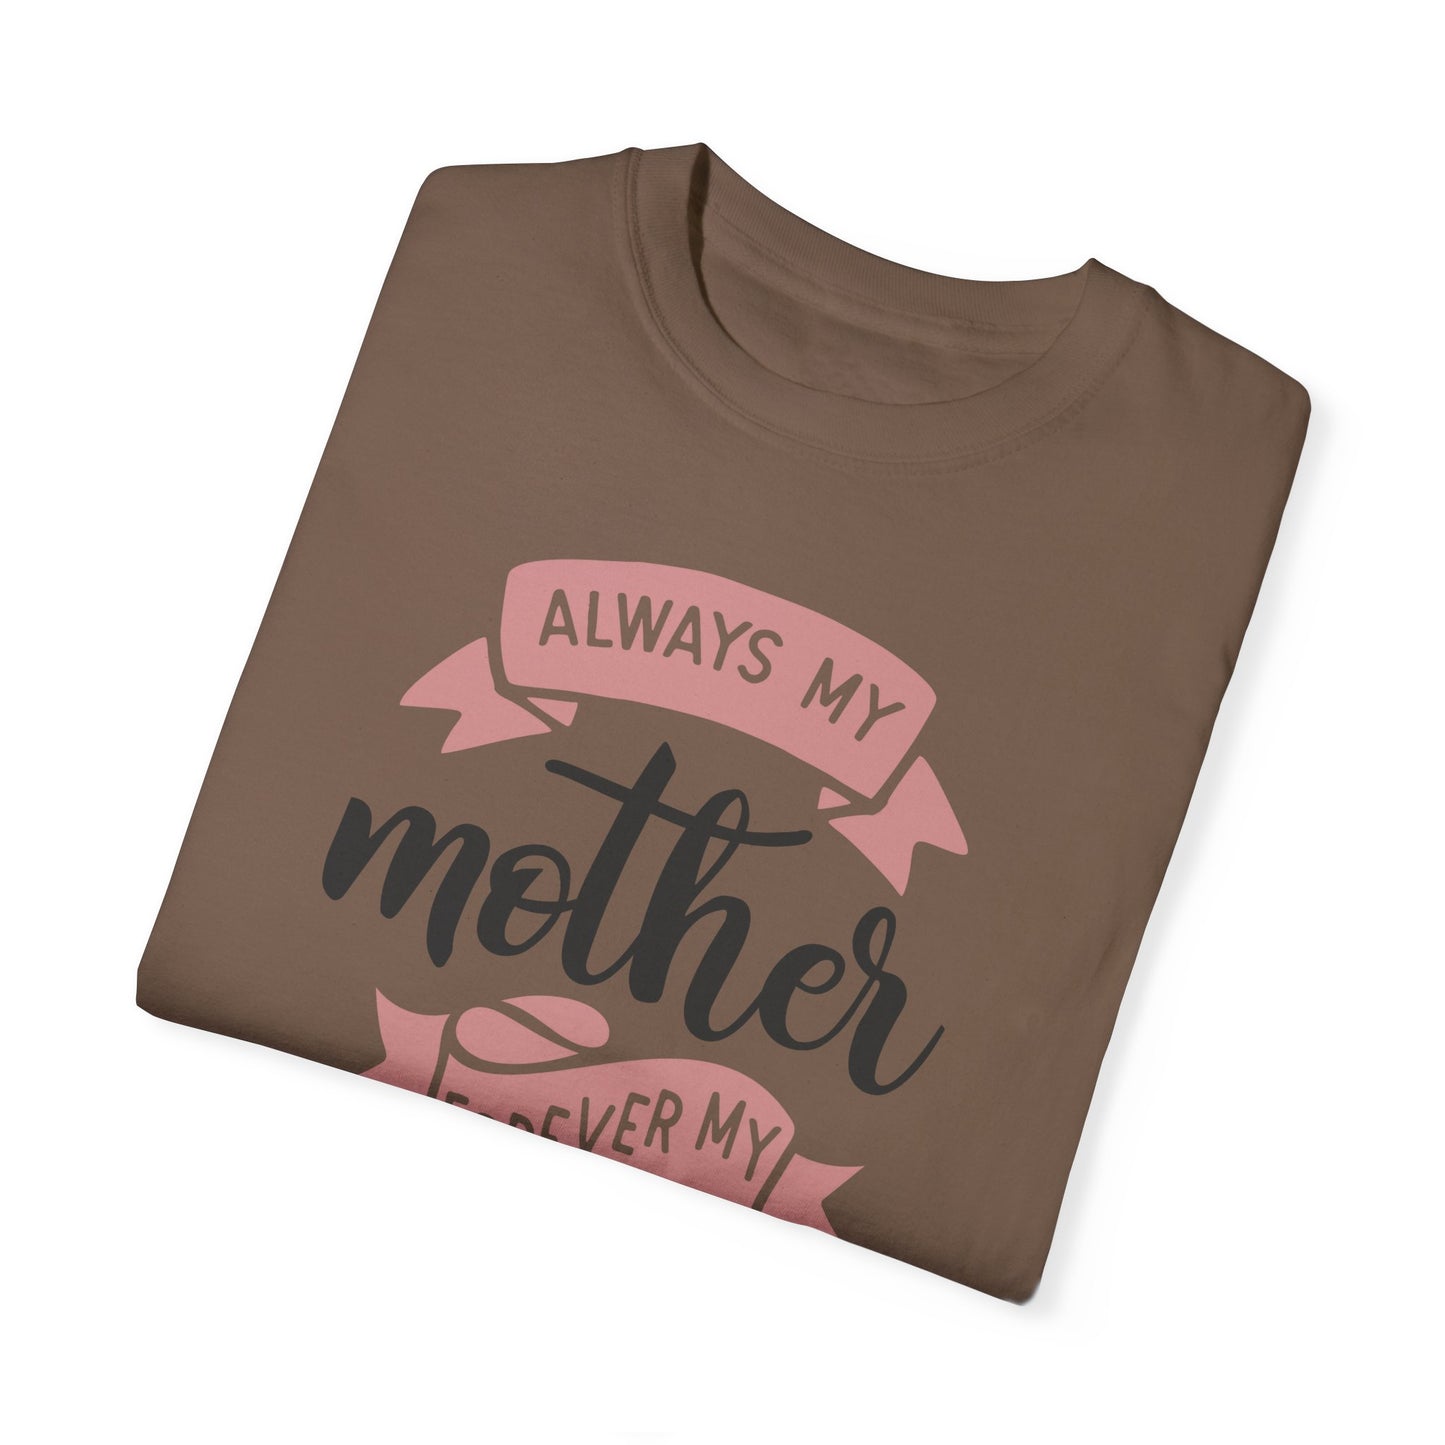 Always my mother forever my friend - Unisex Garment-Dyed T-shirt